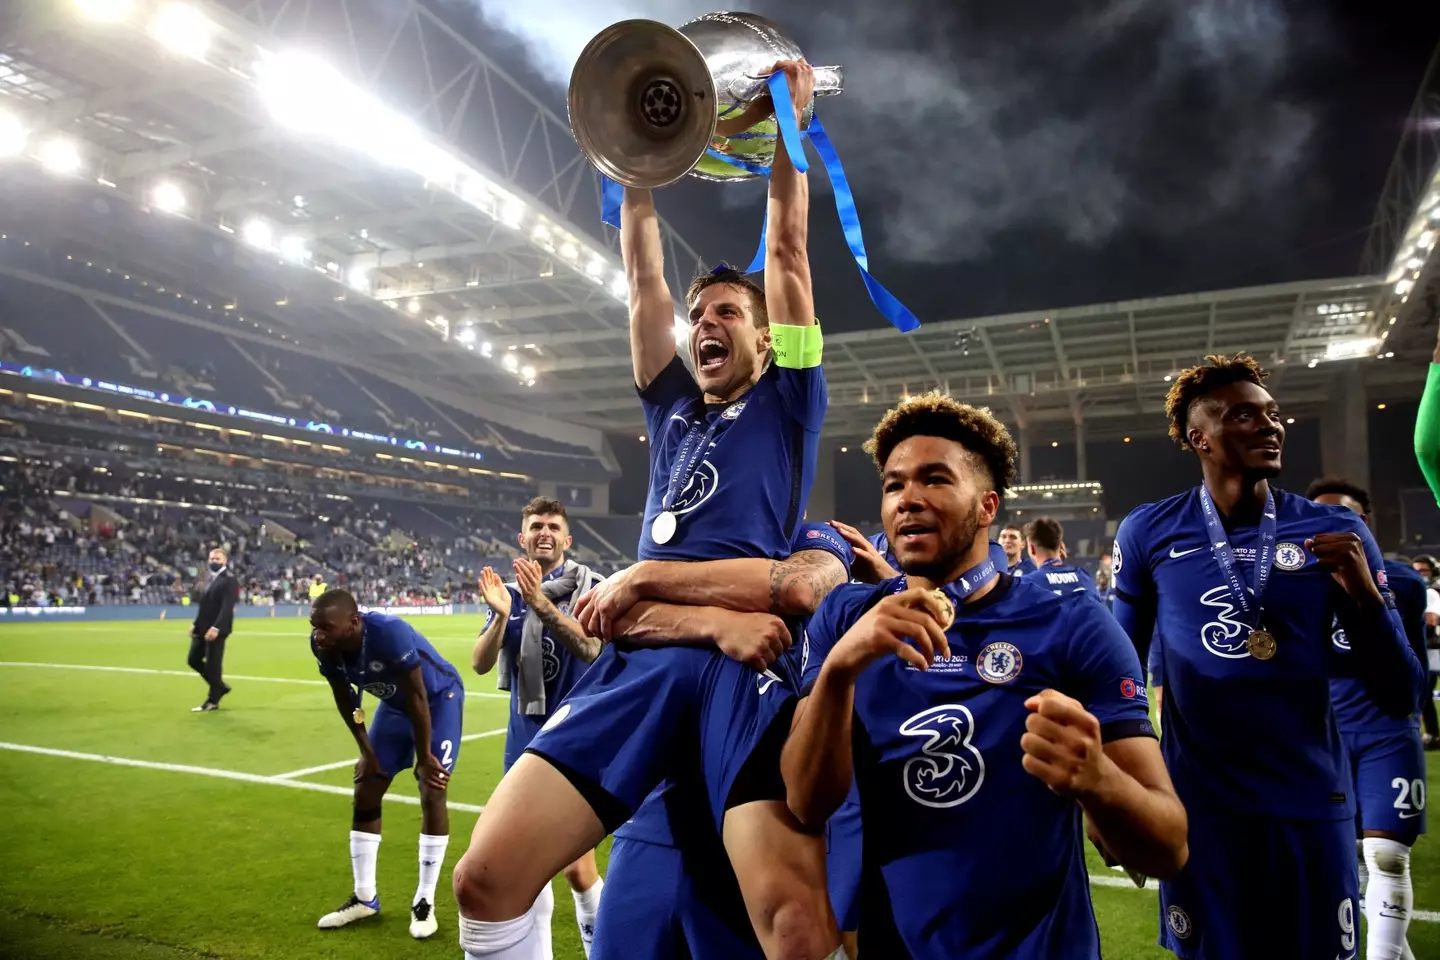 Chelsea won the 2021/22 Champions League after beating Manchester City 1-0 in the final